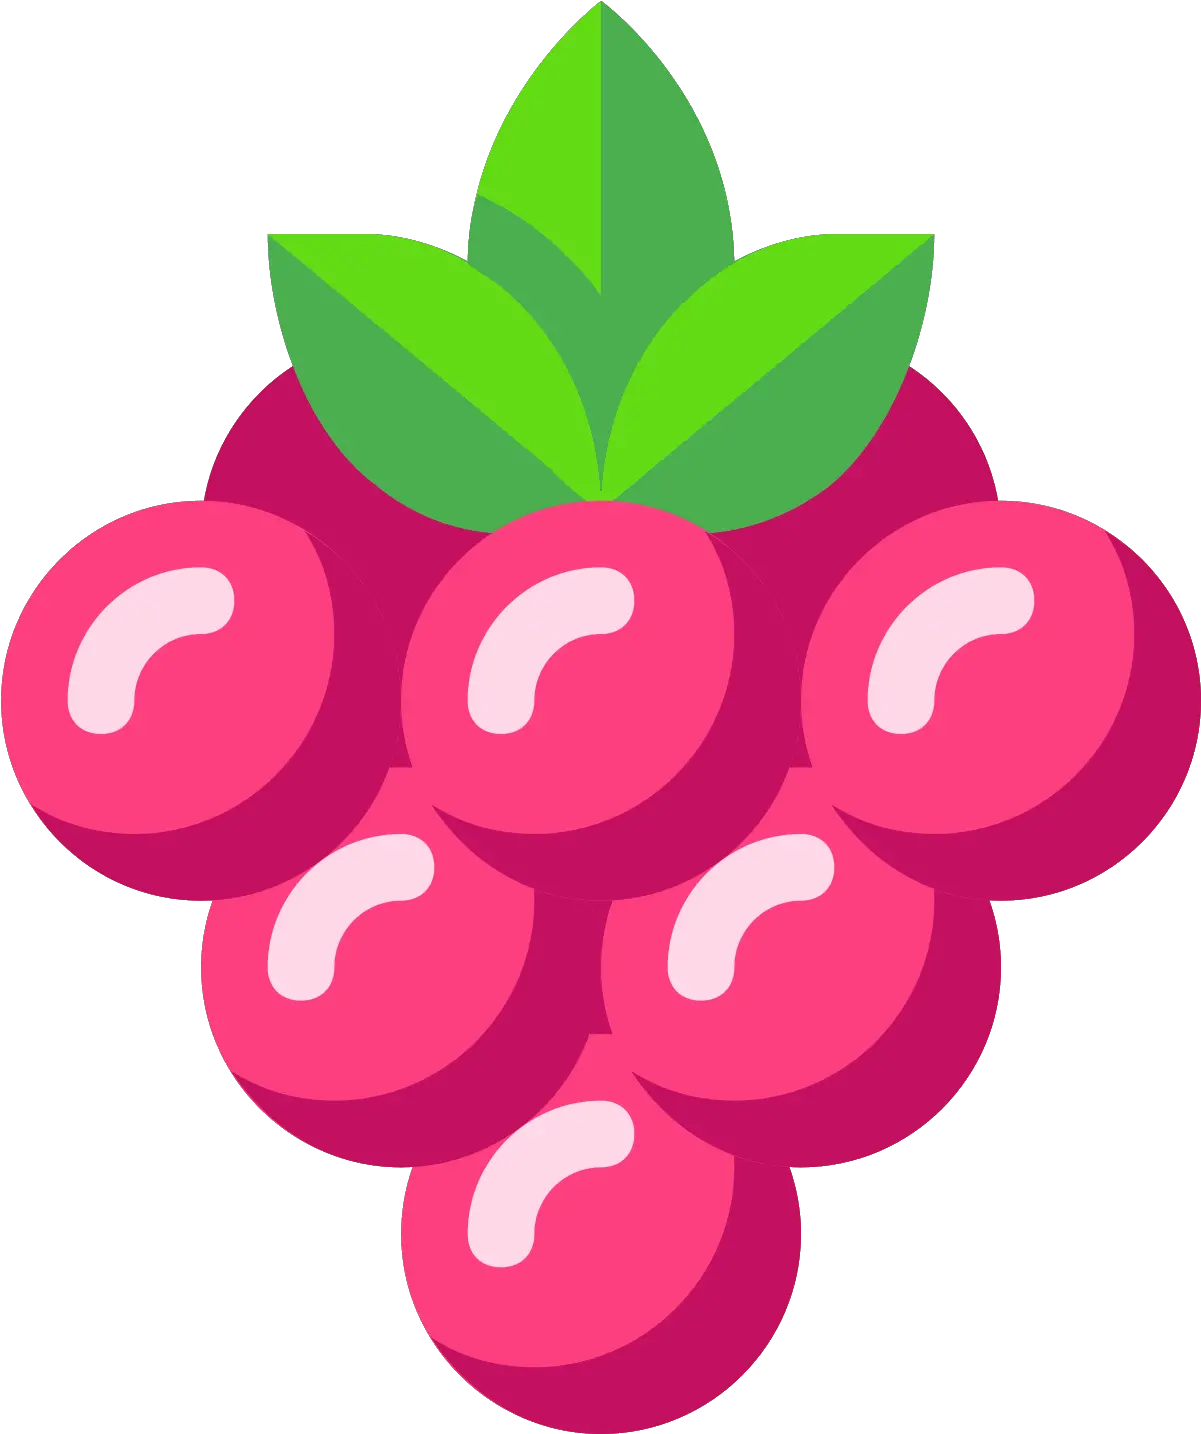 Download Berry Vector Berry Png Full Size Png Image Pngkit Berry Vector Free Download Berry Png